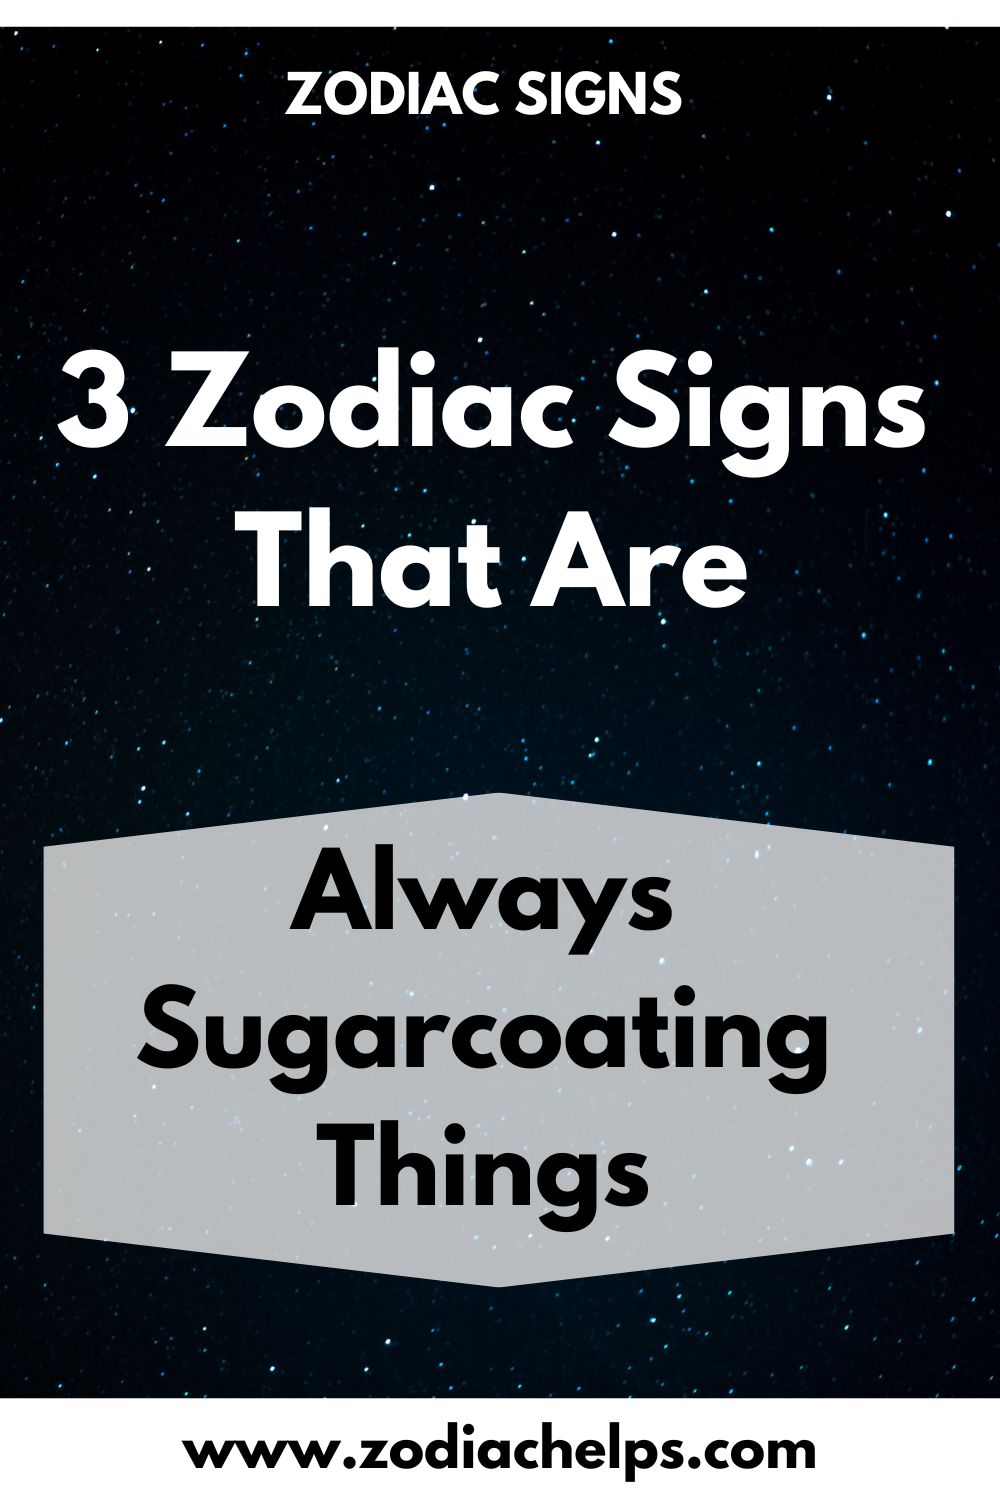 3 Zodiac Signs That Are Always Sugarcoating Things